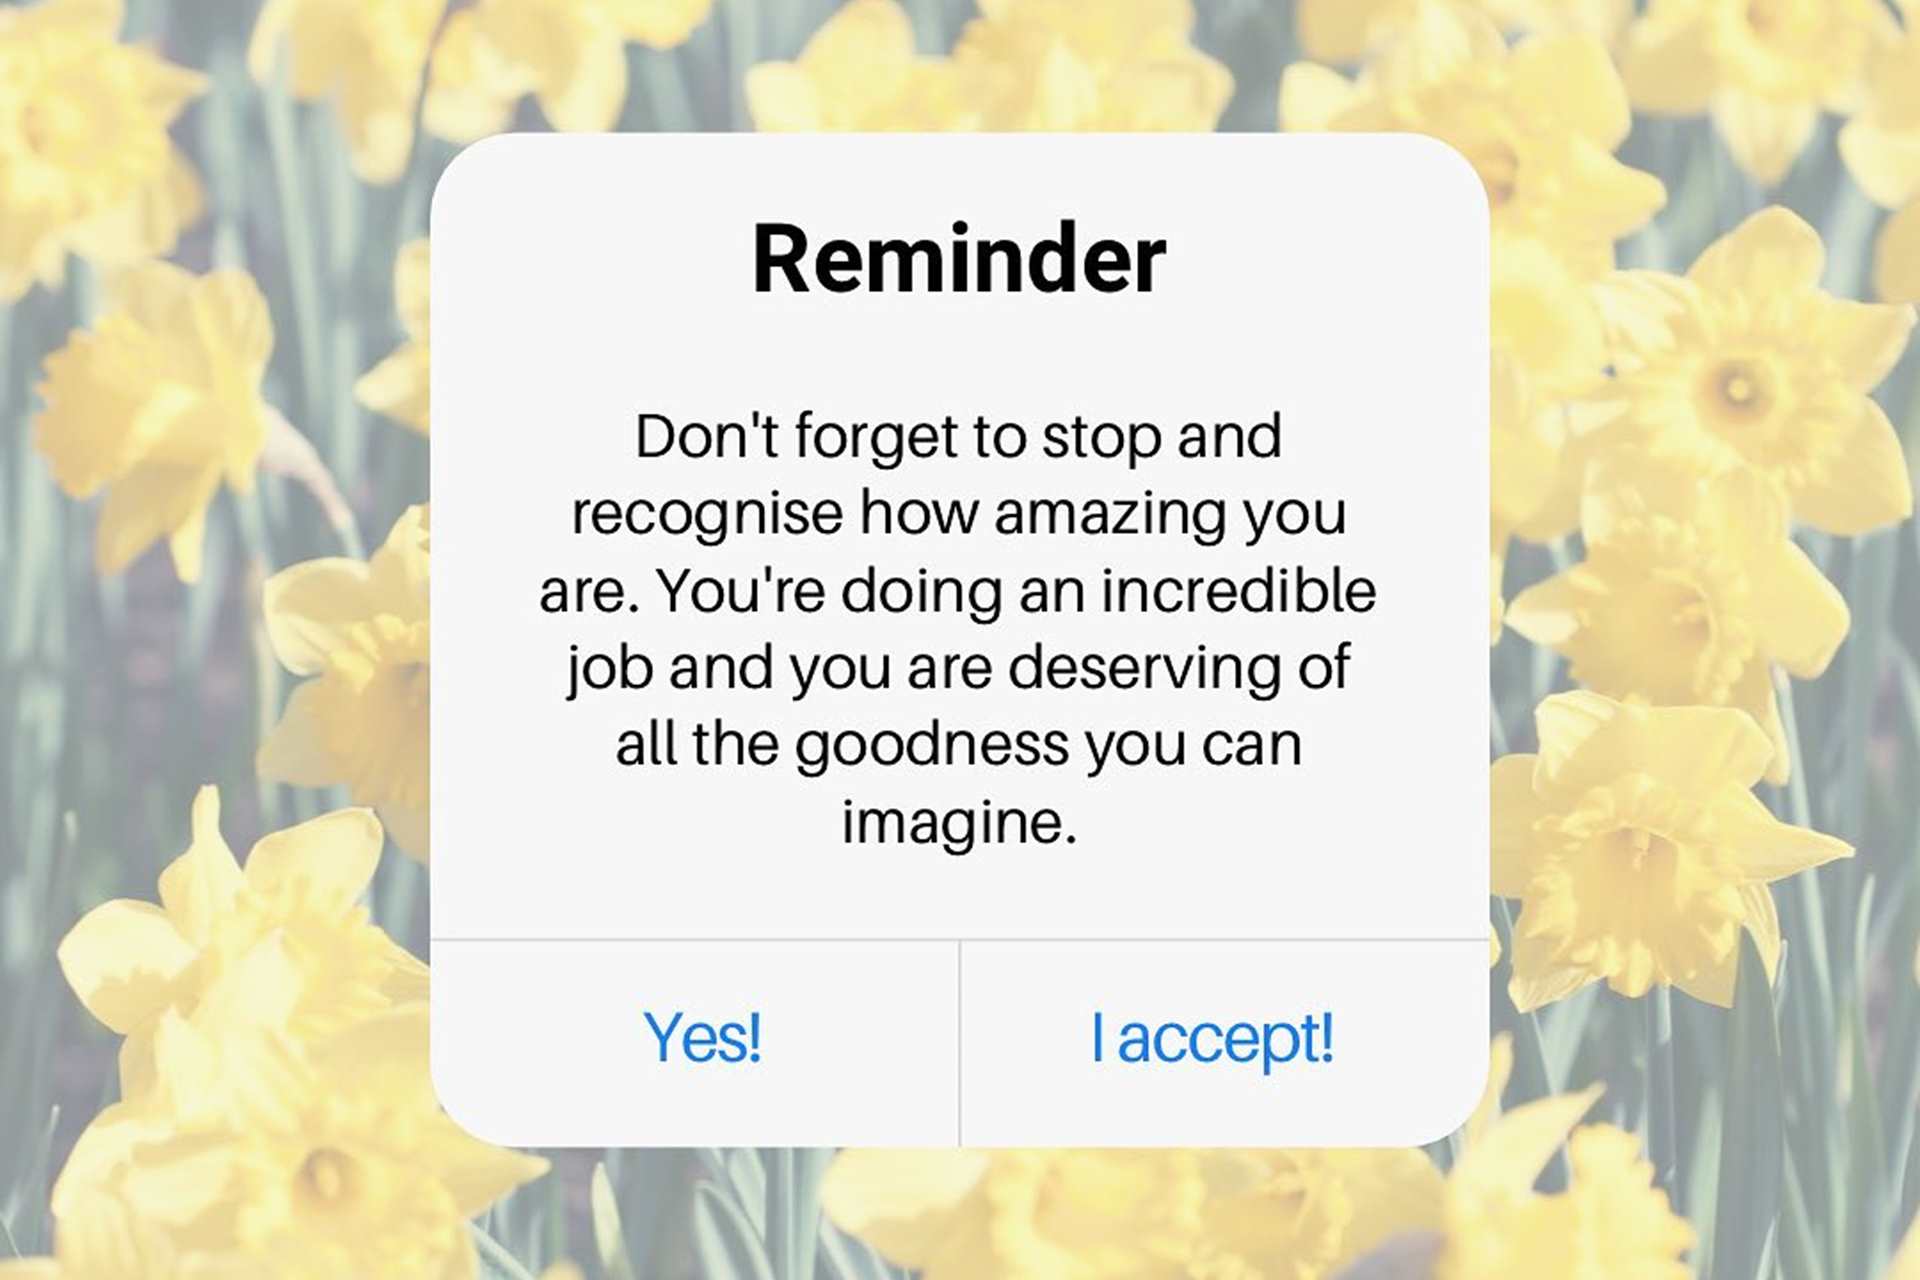 A picture of yellow flowers is slightly blurred as the image background, and is layered with a white box containing black text that reads: reminder. don't forget to stop and recognise how amazing you are. you're doing an incredible job and you are deserving of all the goodness you can imagine.